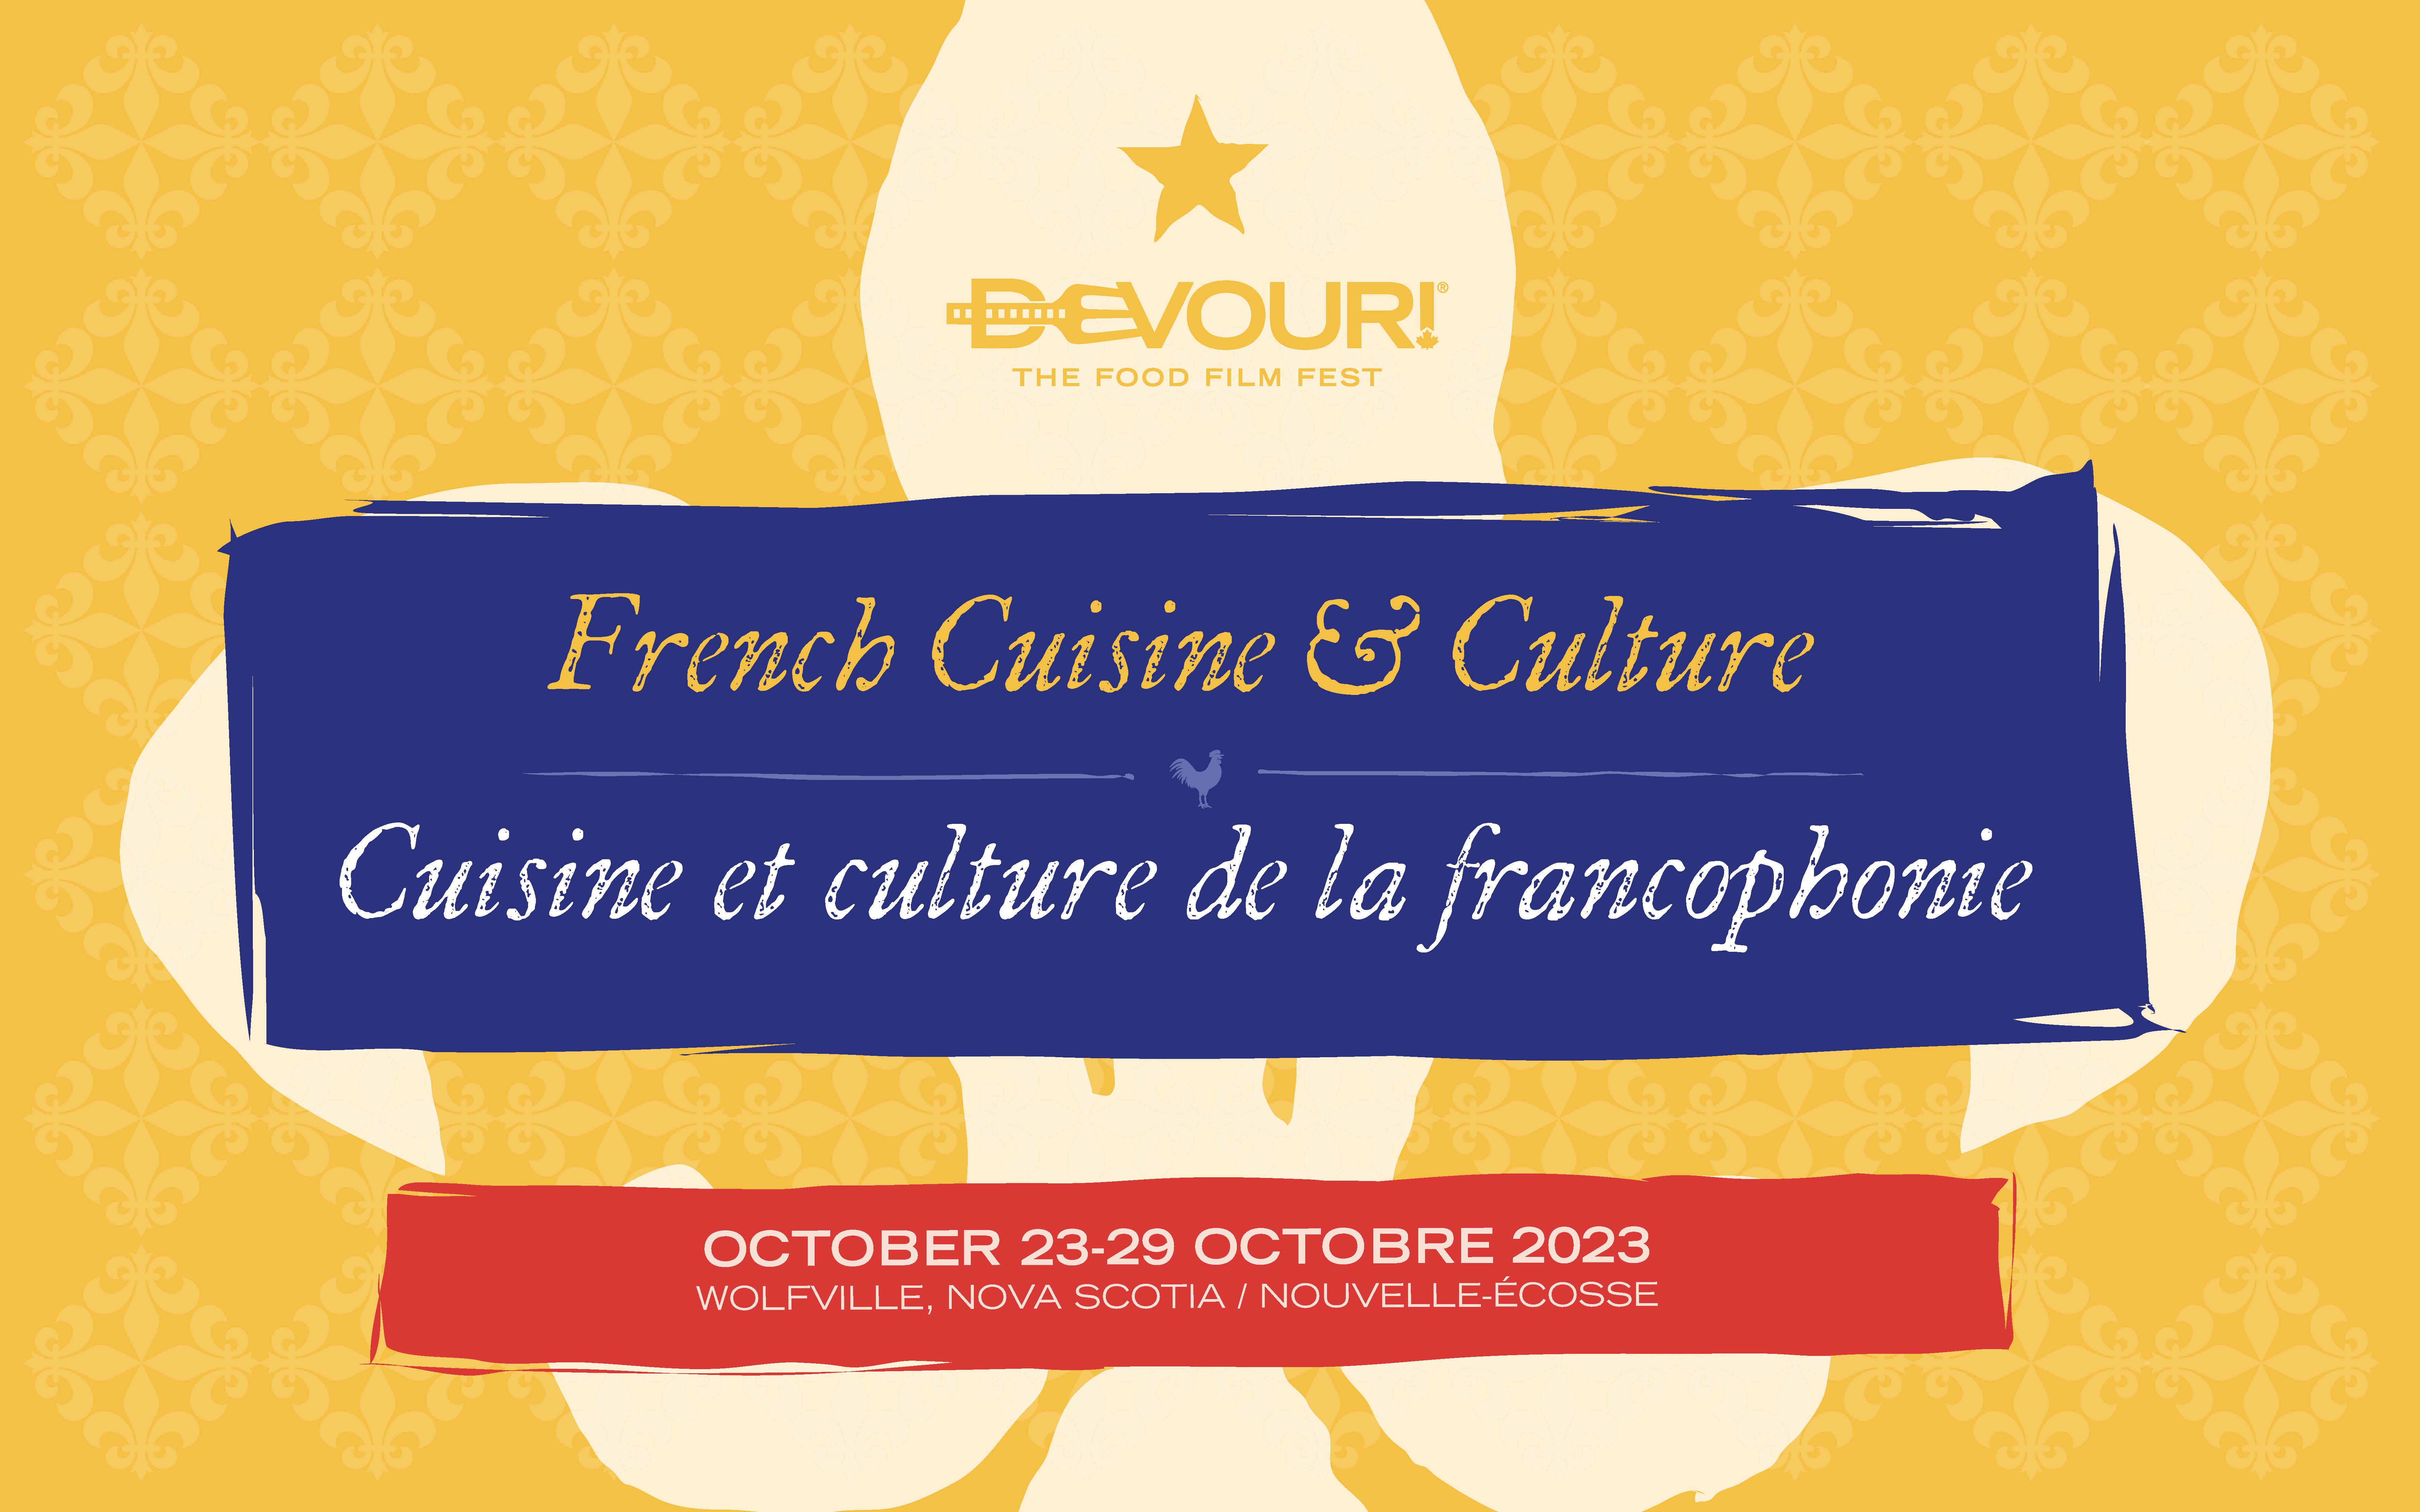 Devour page announcing French Cuisine and Culture